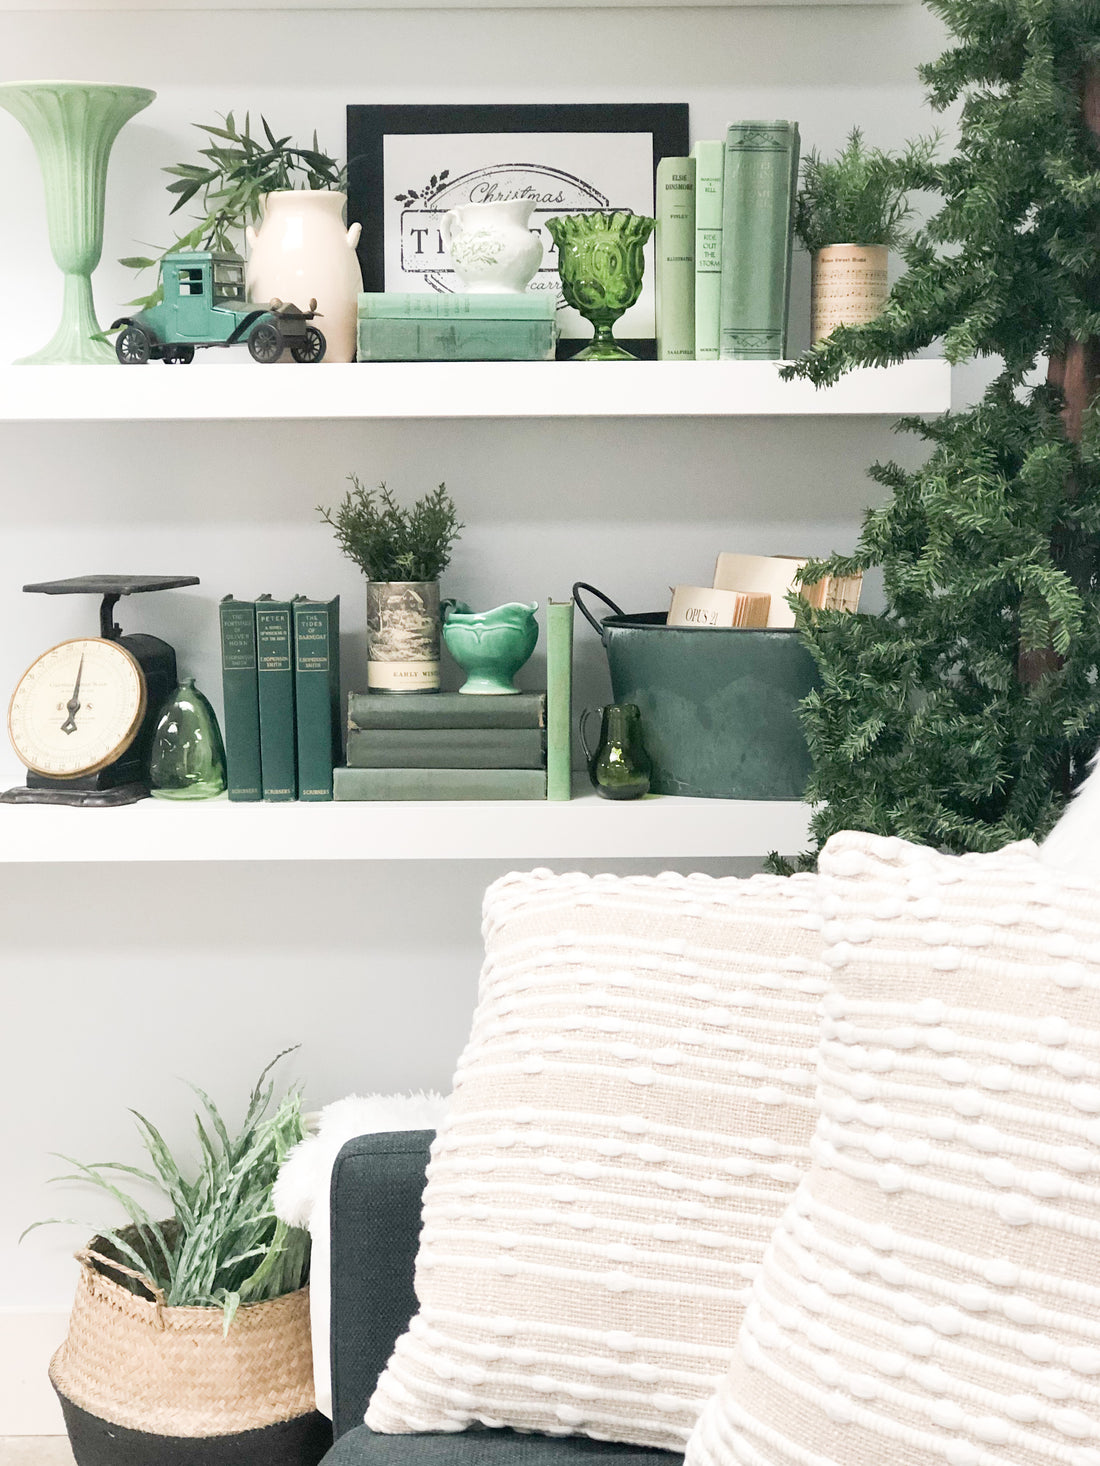 Using Shades of Green for Christmas